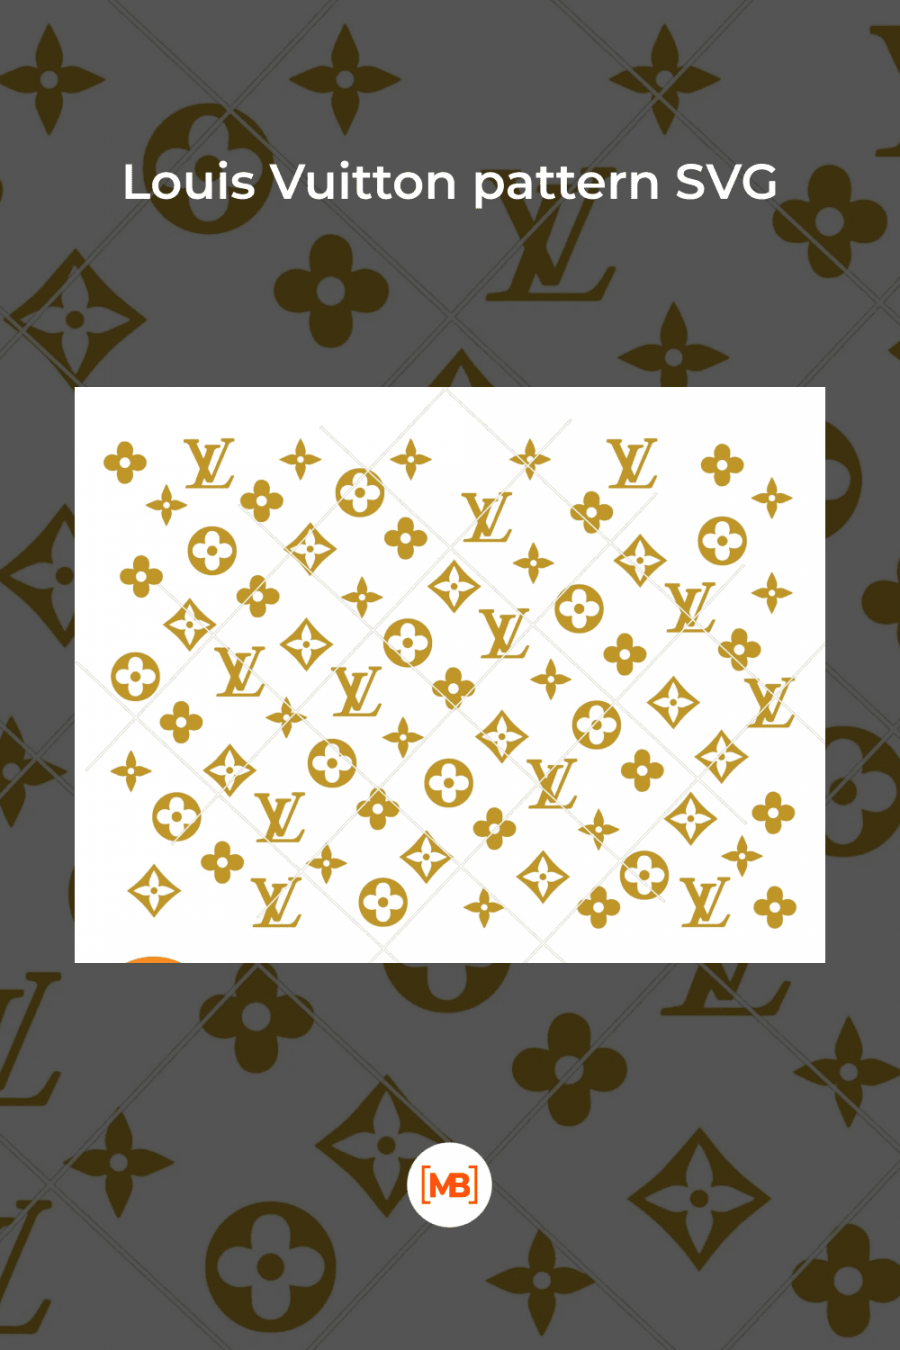 + Best Louis Vuitton SVG Images : Free and Premium  - FREE Printables - Printable Louis Vuitton Svg Free